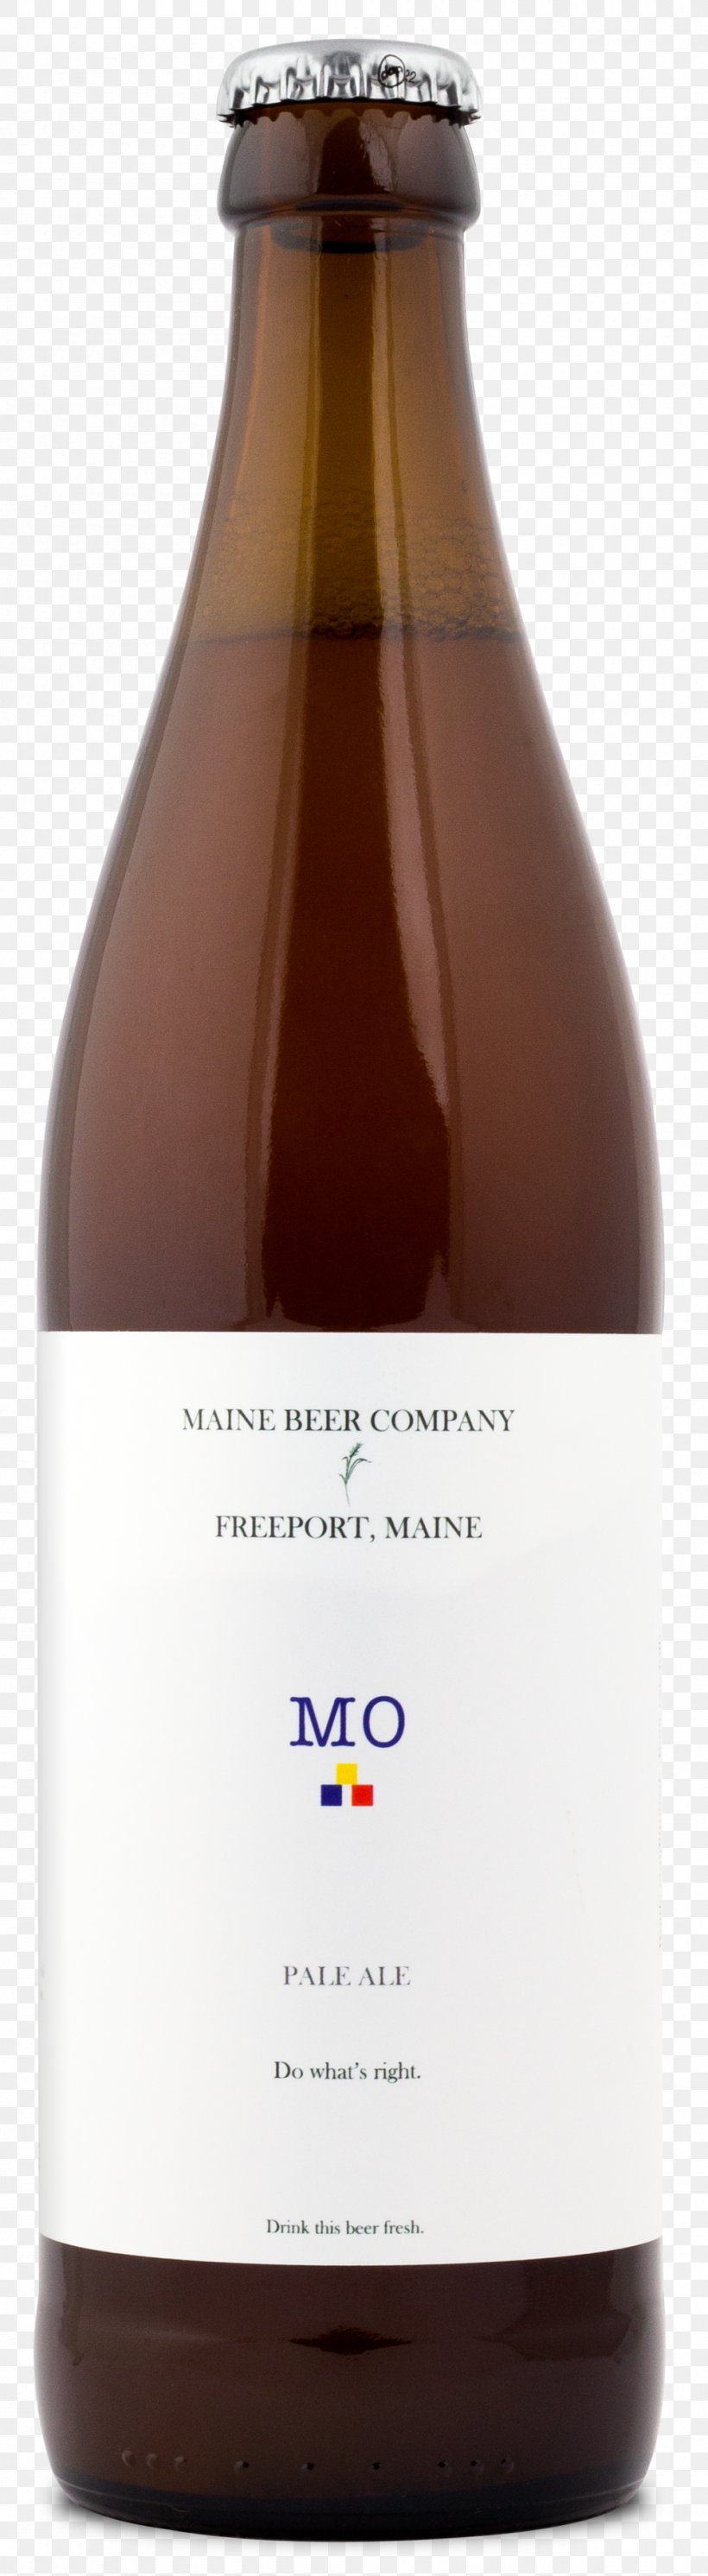 Maine Beer Company Pale Ale Beer Bottle, PNG, 1000x3639px, Beer, Ale, Barley, Beer Bottle, Beer Brewing Grains Malts Download Free